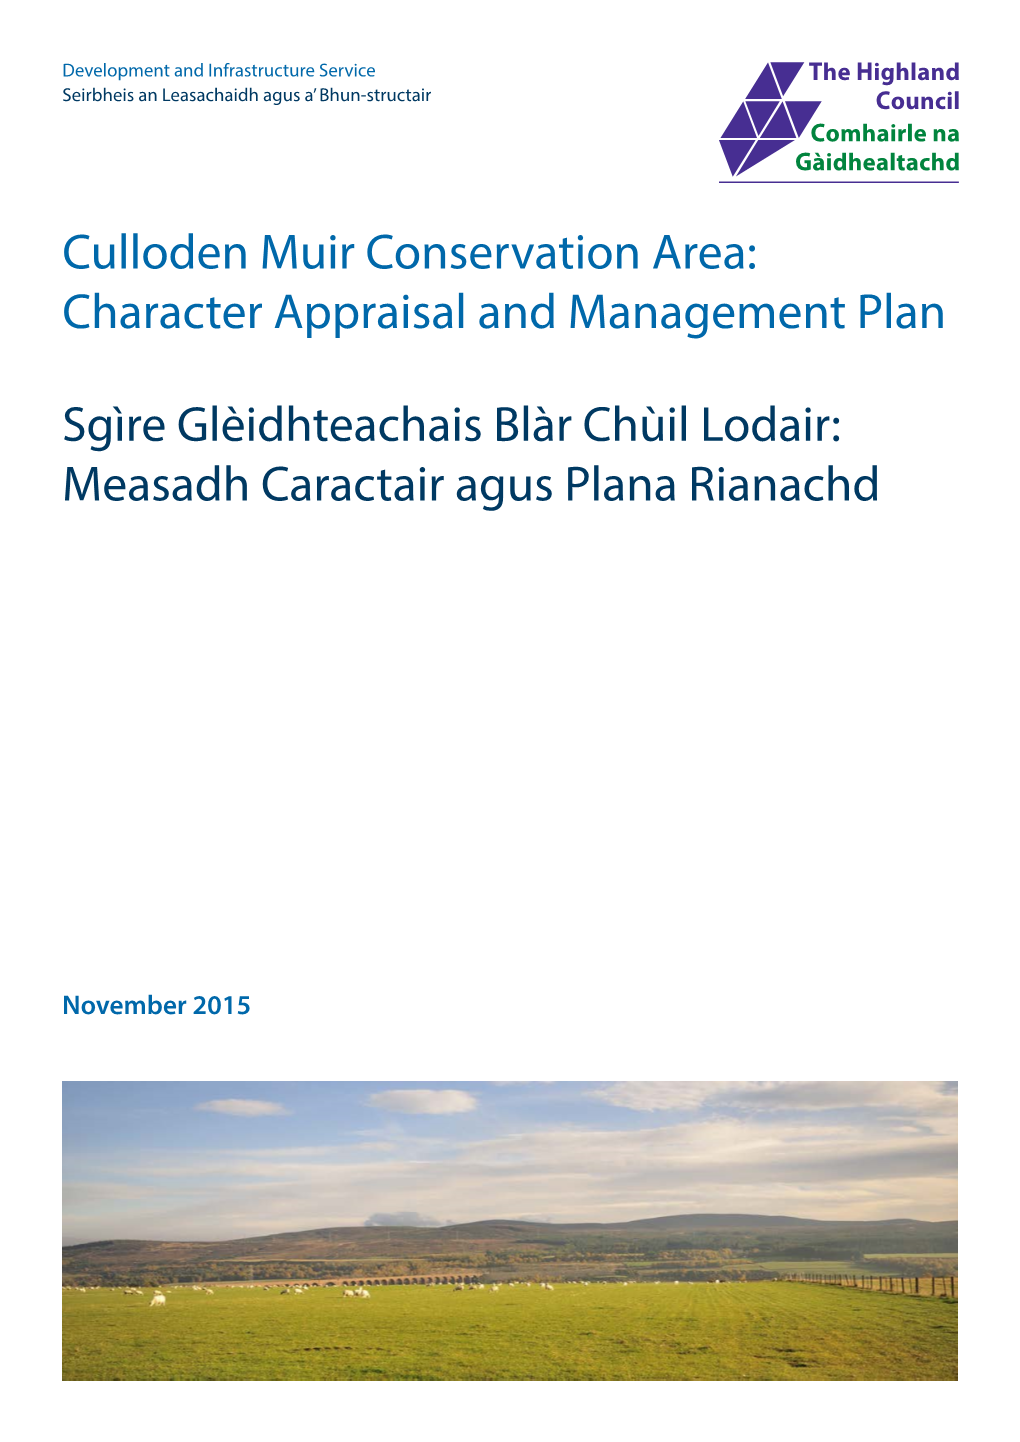 Culloden Muir Conservation Area: Character Appraisal and Management Plan